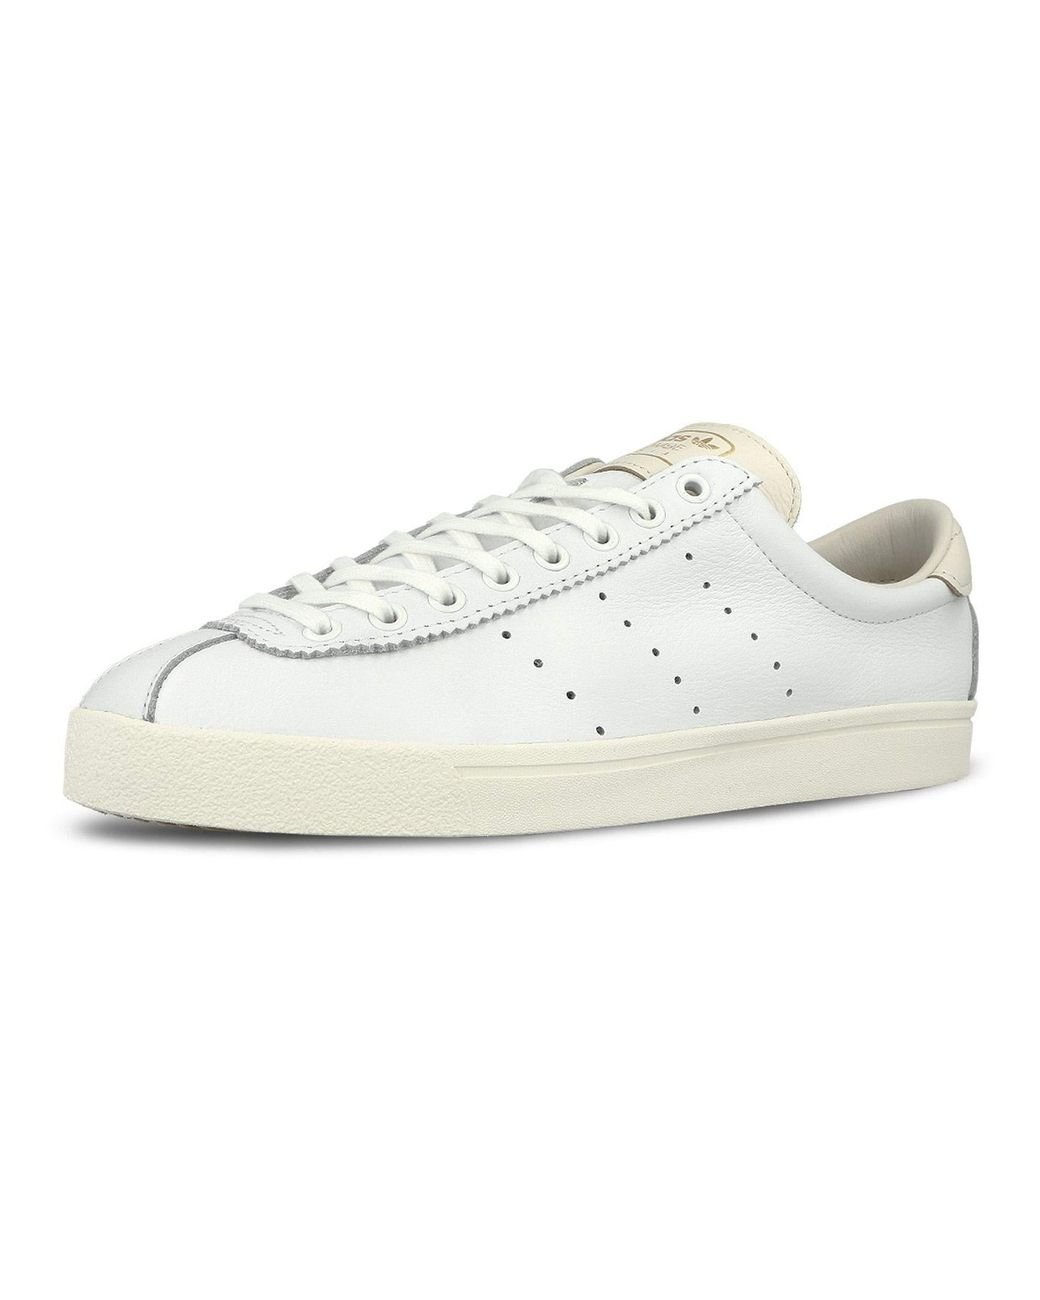 adidas white leather trainers